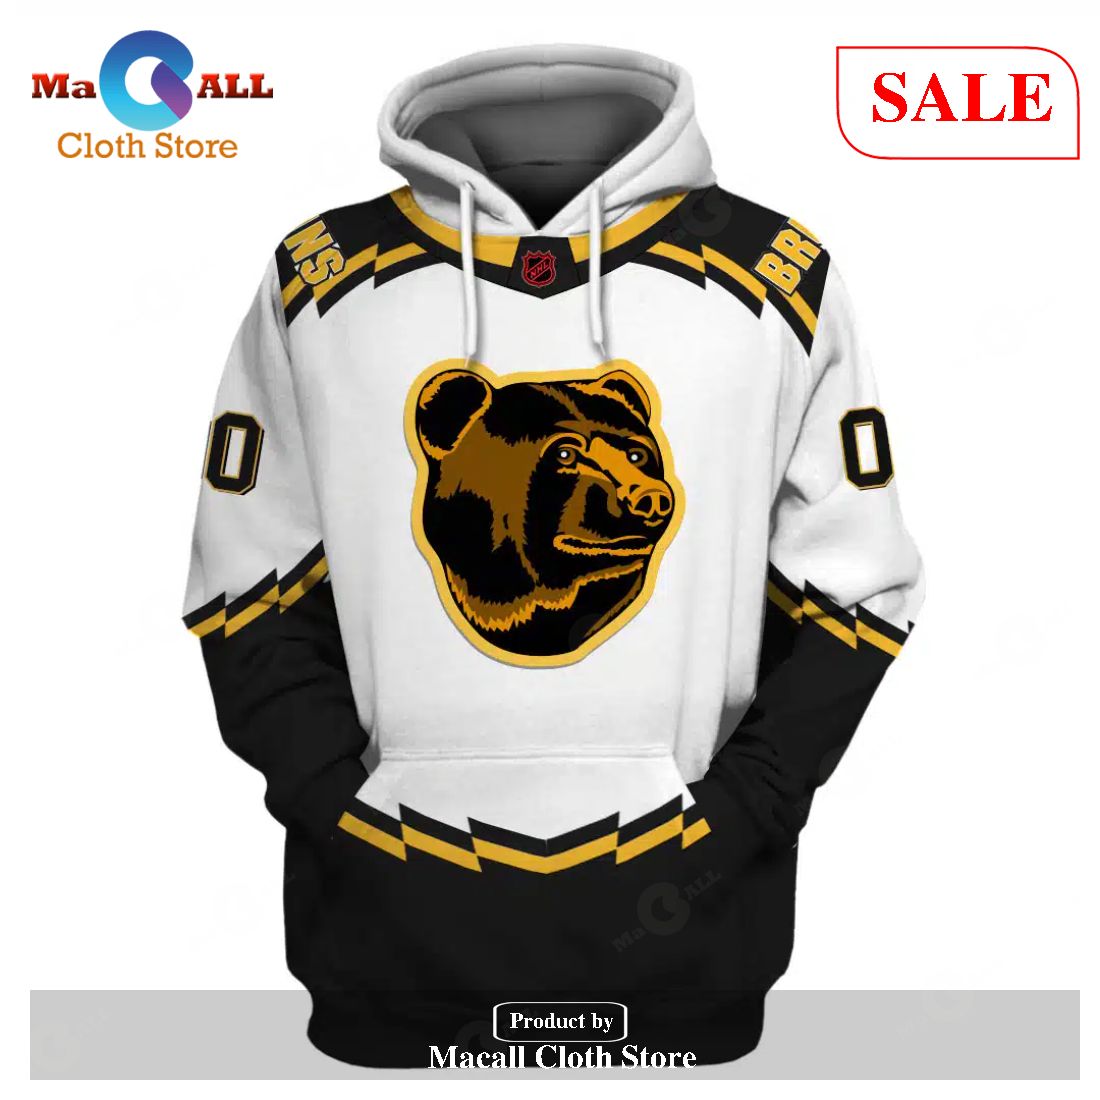 SALE] Personalized Name Number NHL Reverse Retro Jerseys Boston Bruins Hoodie Sweatshirt 3D - Macall Cloth Store Destination fashionistas